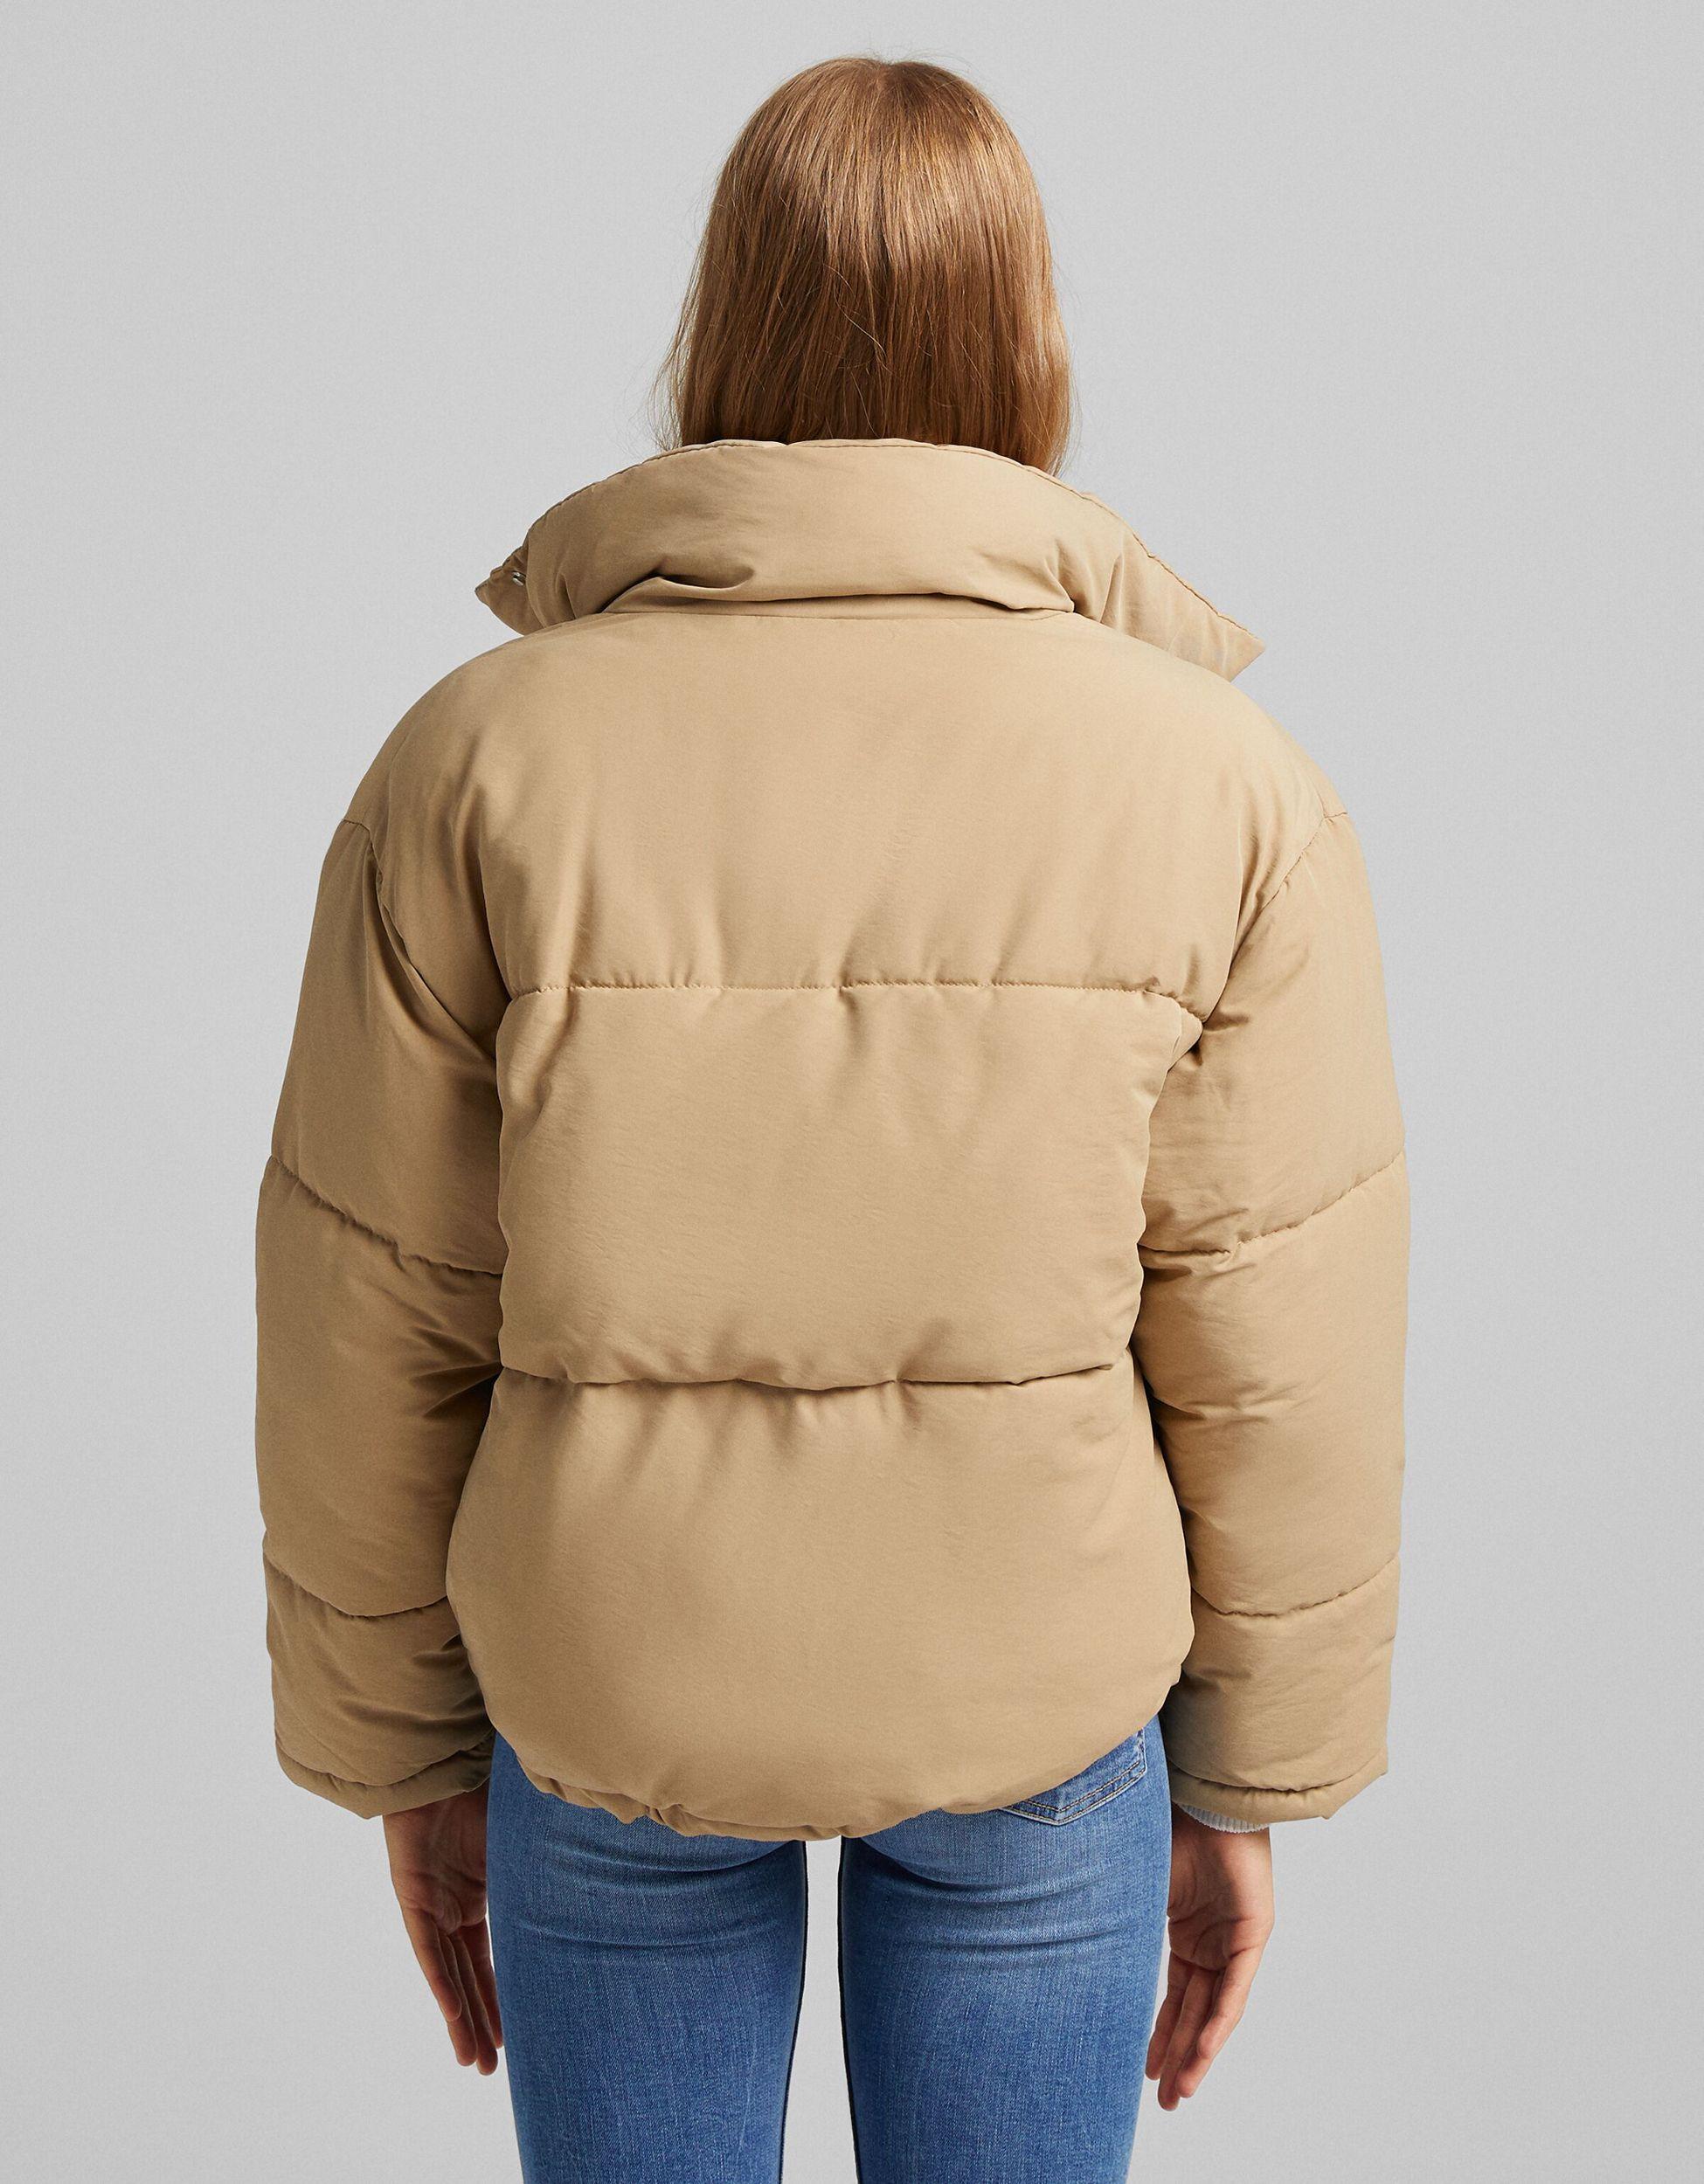 Bershka Synthetic Oversized Padded Puffer Jacket in Brown | Lyst